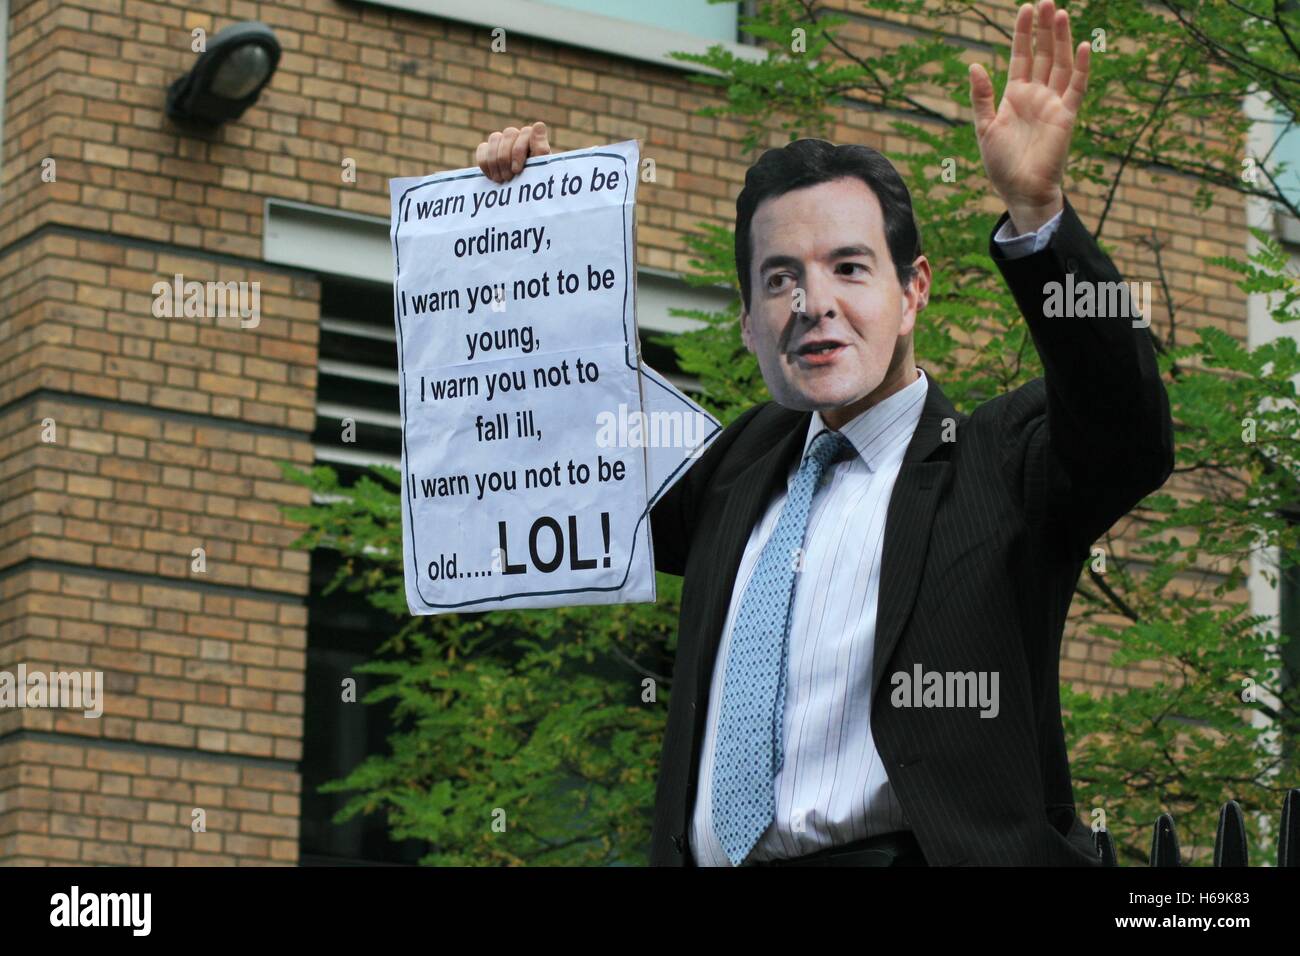 A protester dressed as the Chancellor of the Exchequer, George Osborne, protests with hundreds of thousands of other demonstrators in the City of London, against the cuts to public spending enacted by the treasury of the Conservative-Liberal Democrat coalition Government. Stock Photo